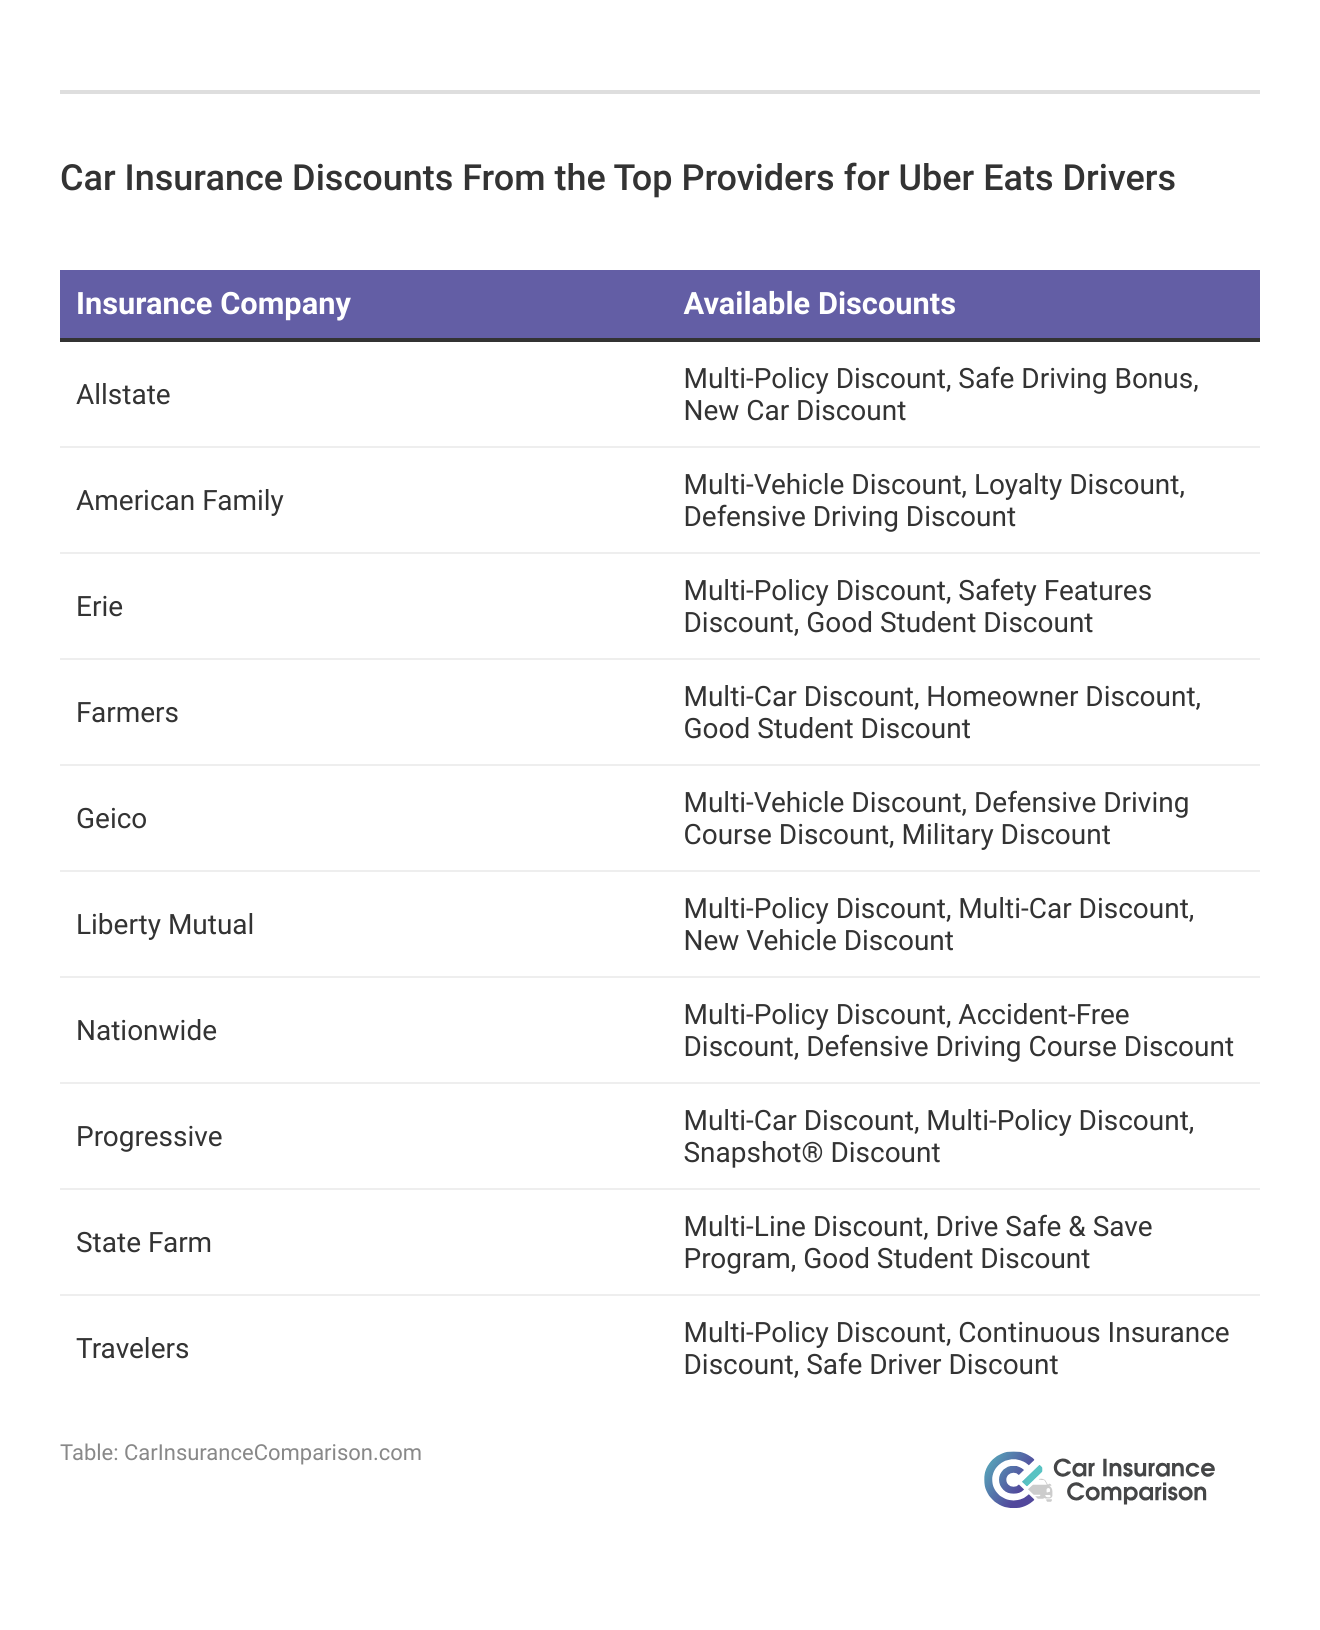 <h3>Car Insurance Discounts From the Top Providers for Uber Eats Drivers</h3>